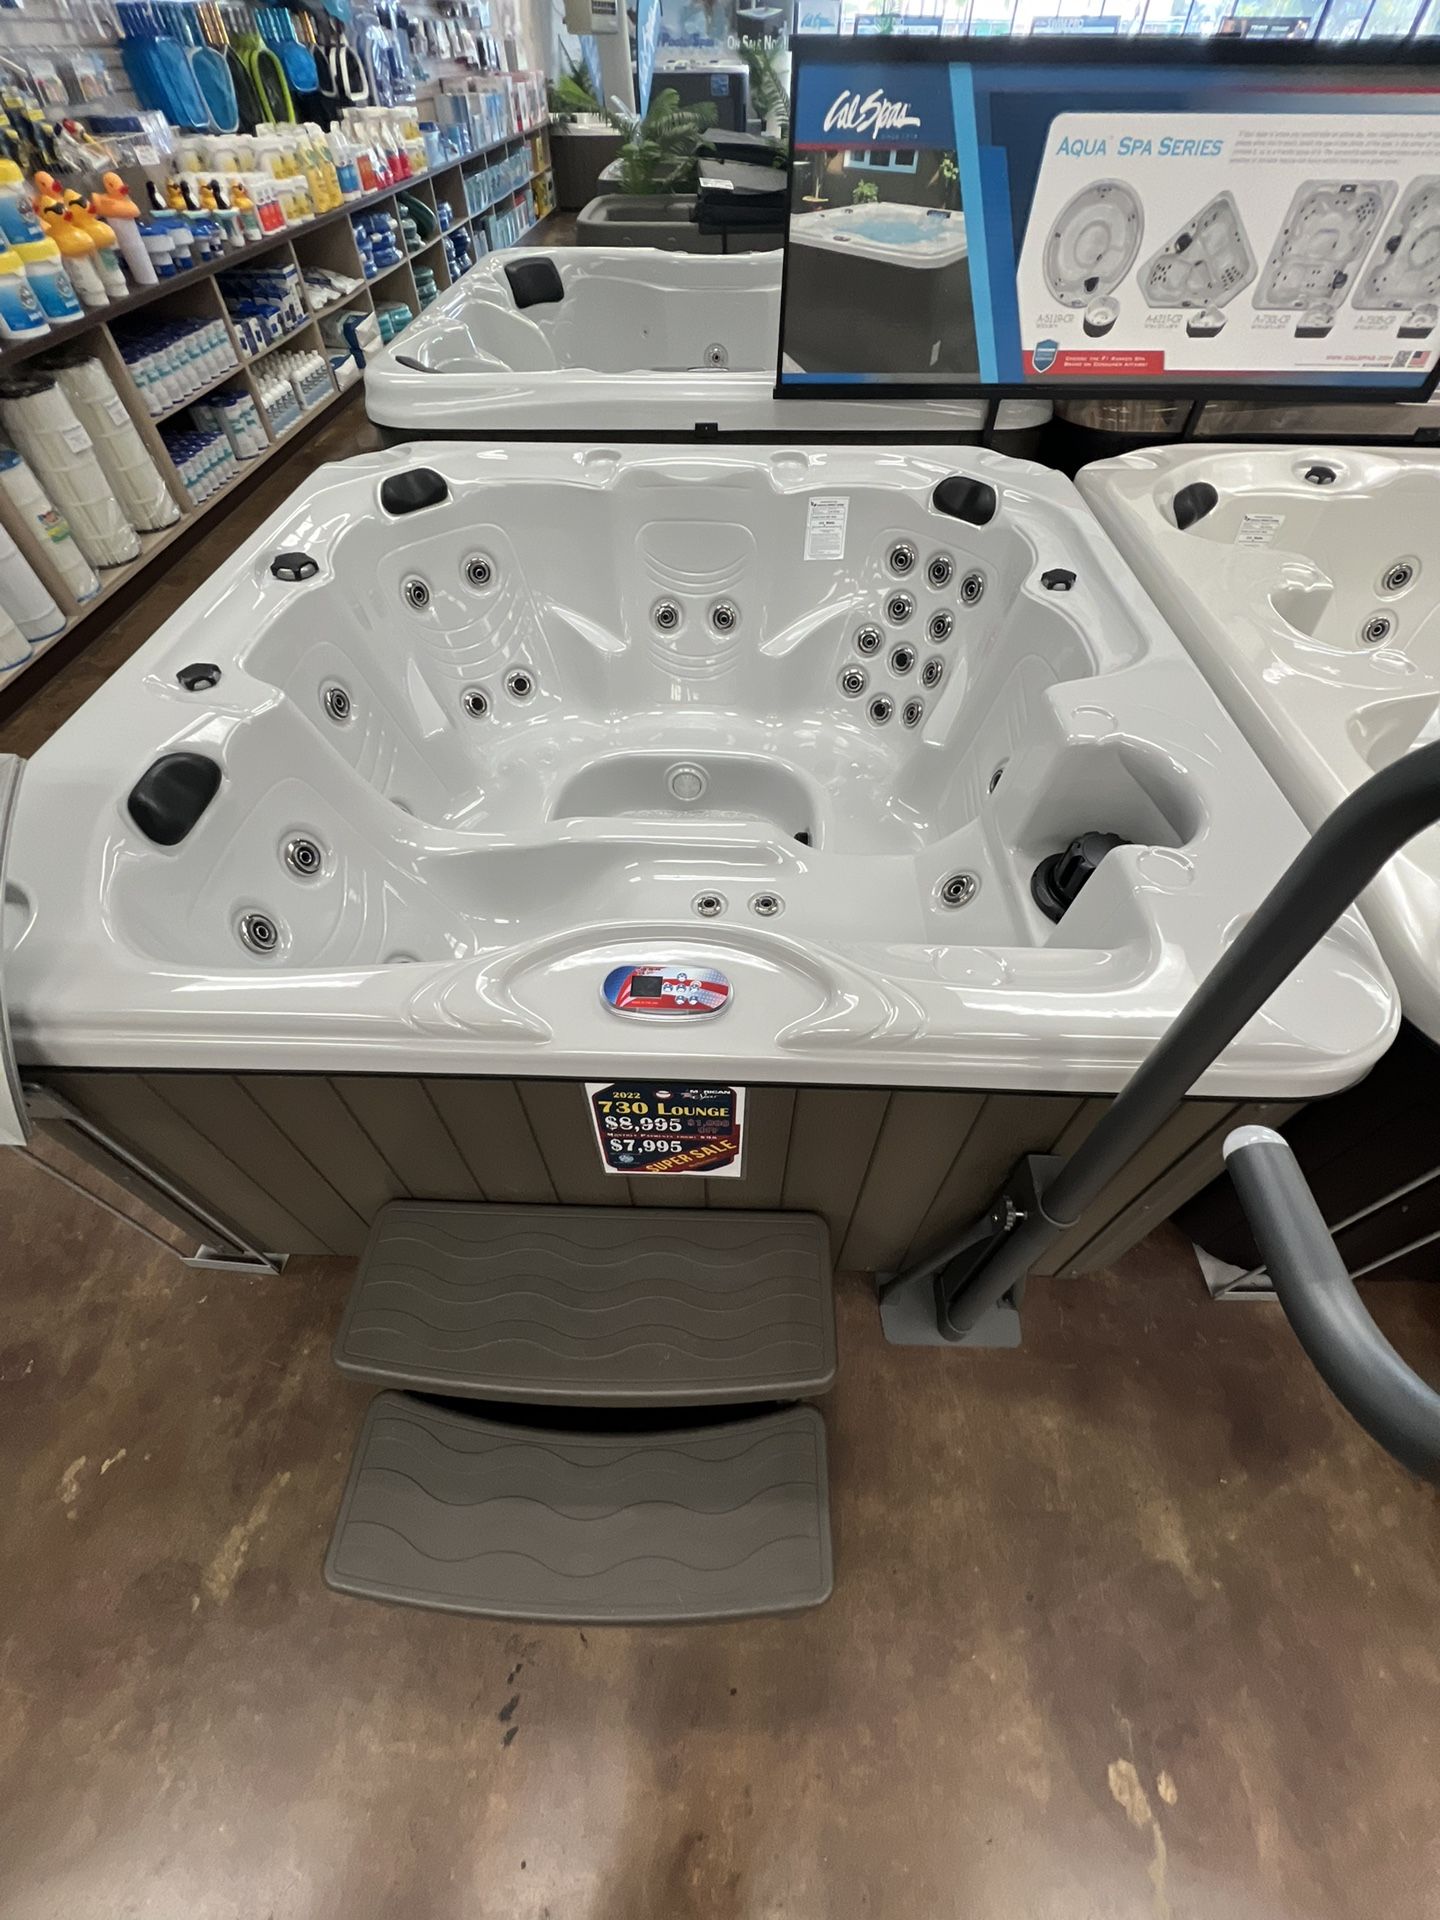 Hot Tub for Sale 